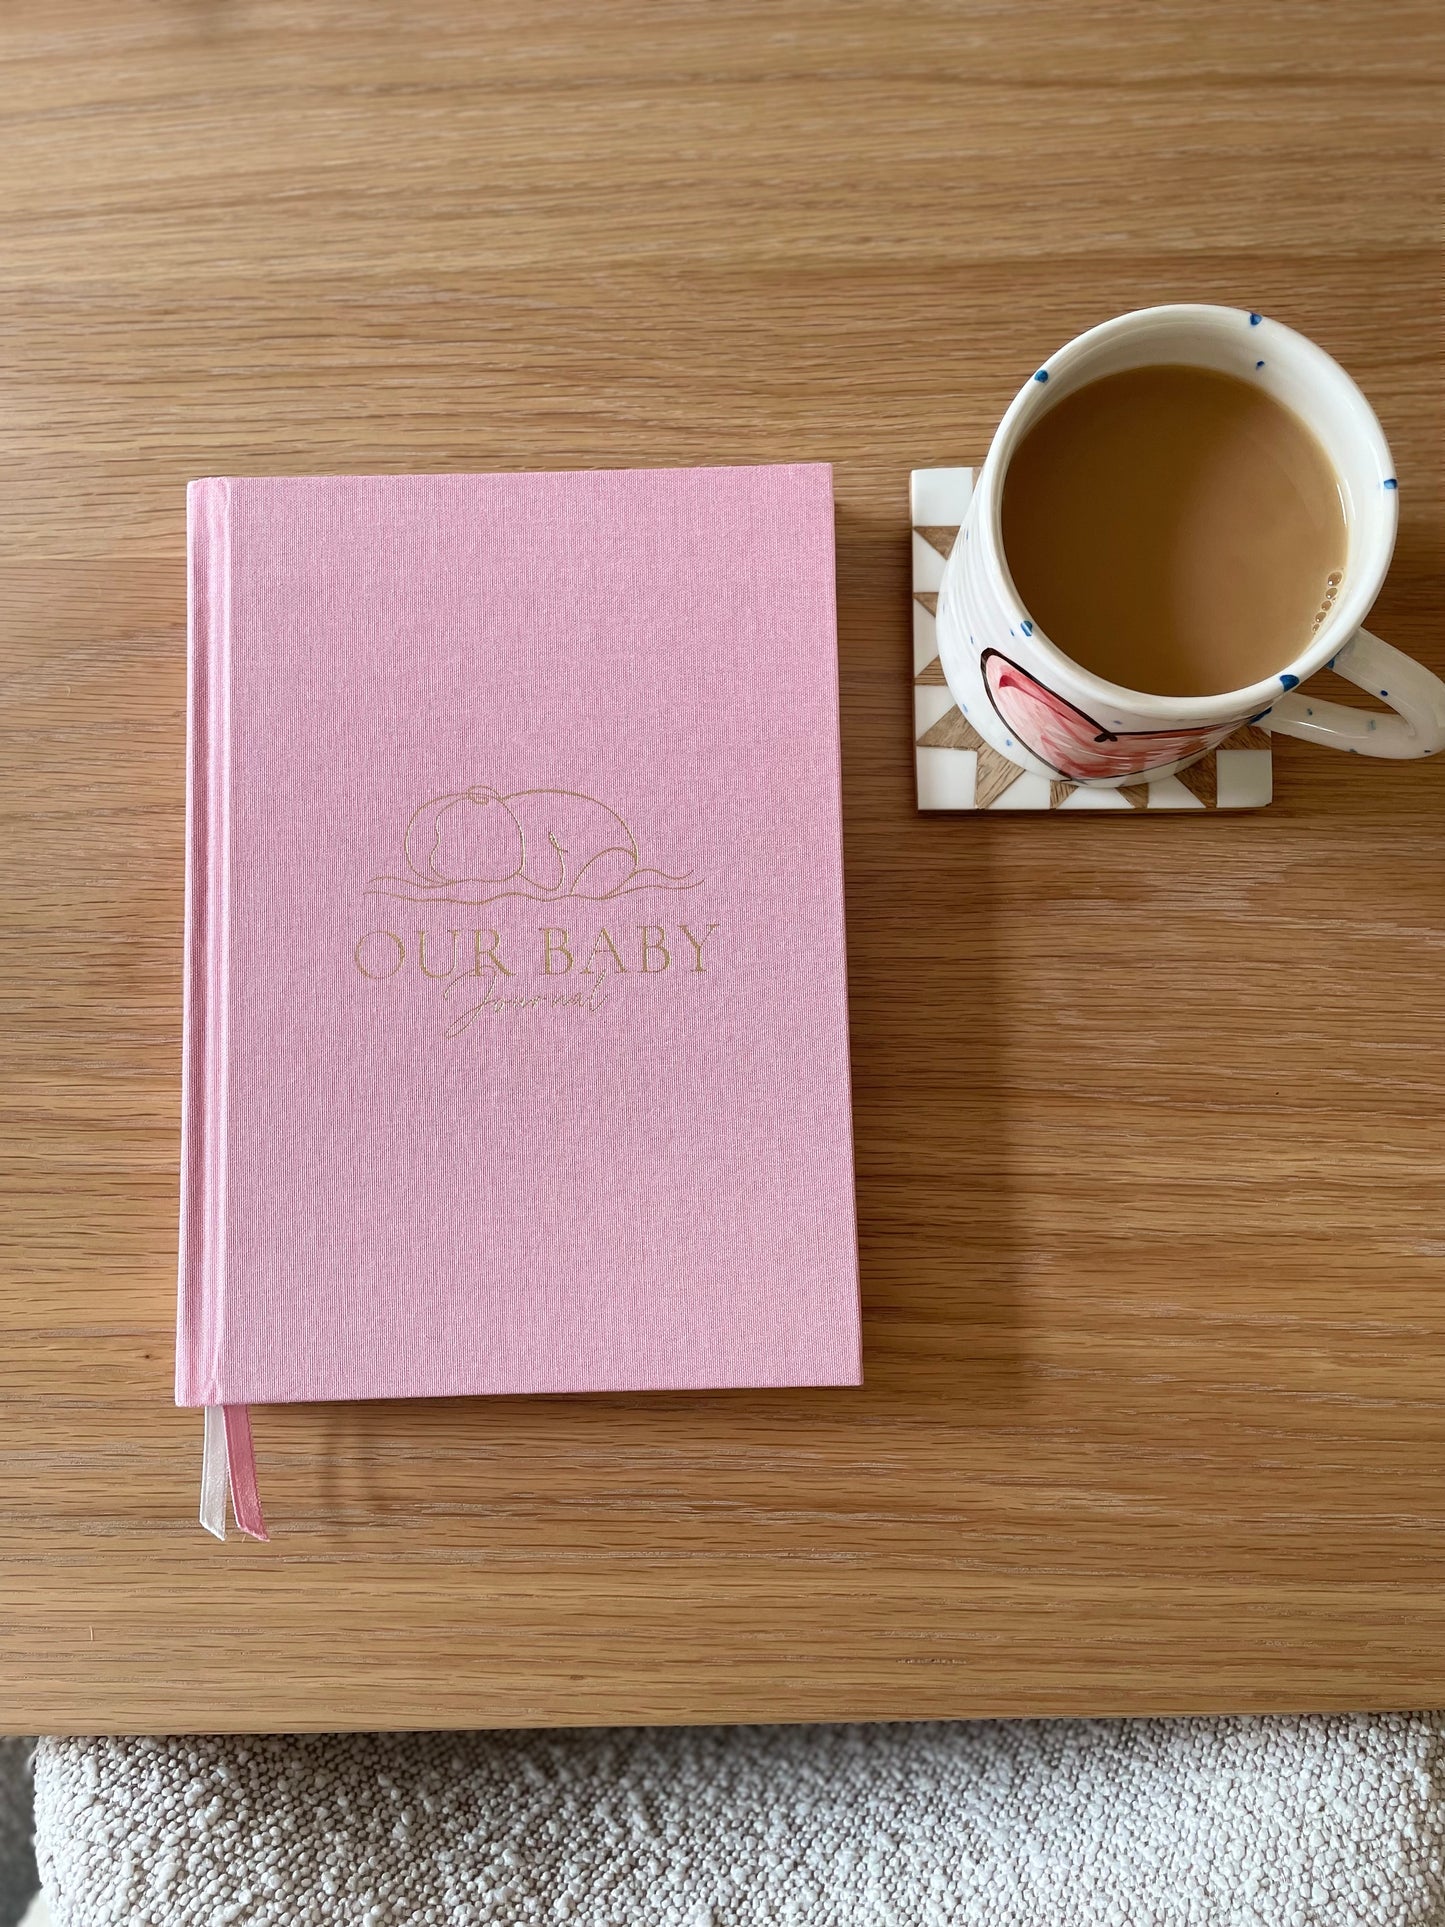 Our Baby Journal - Memory Book - Cherry Blossom Pink